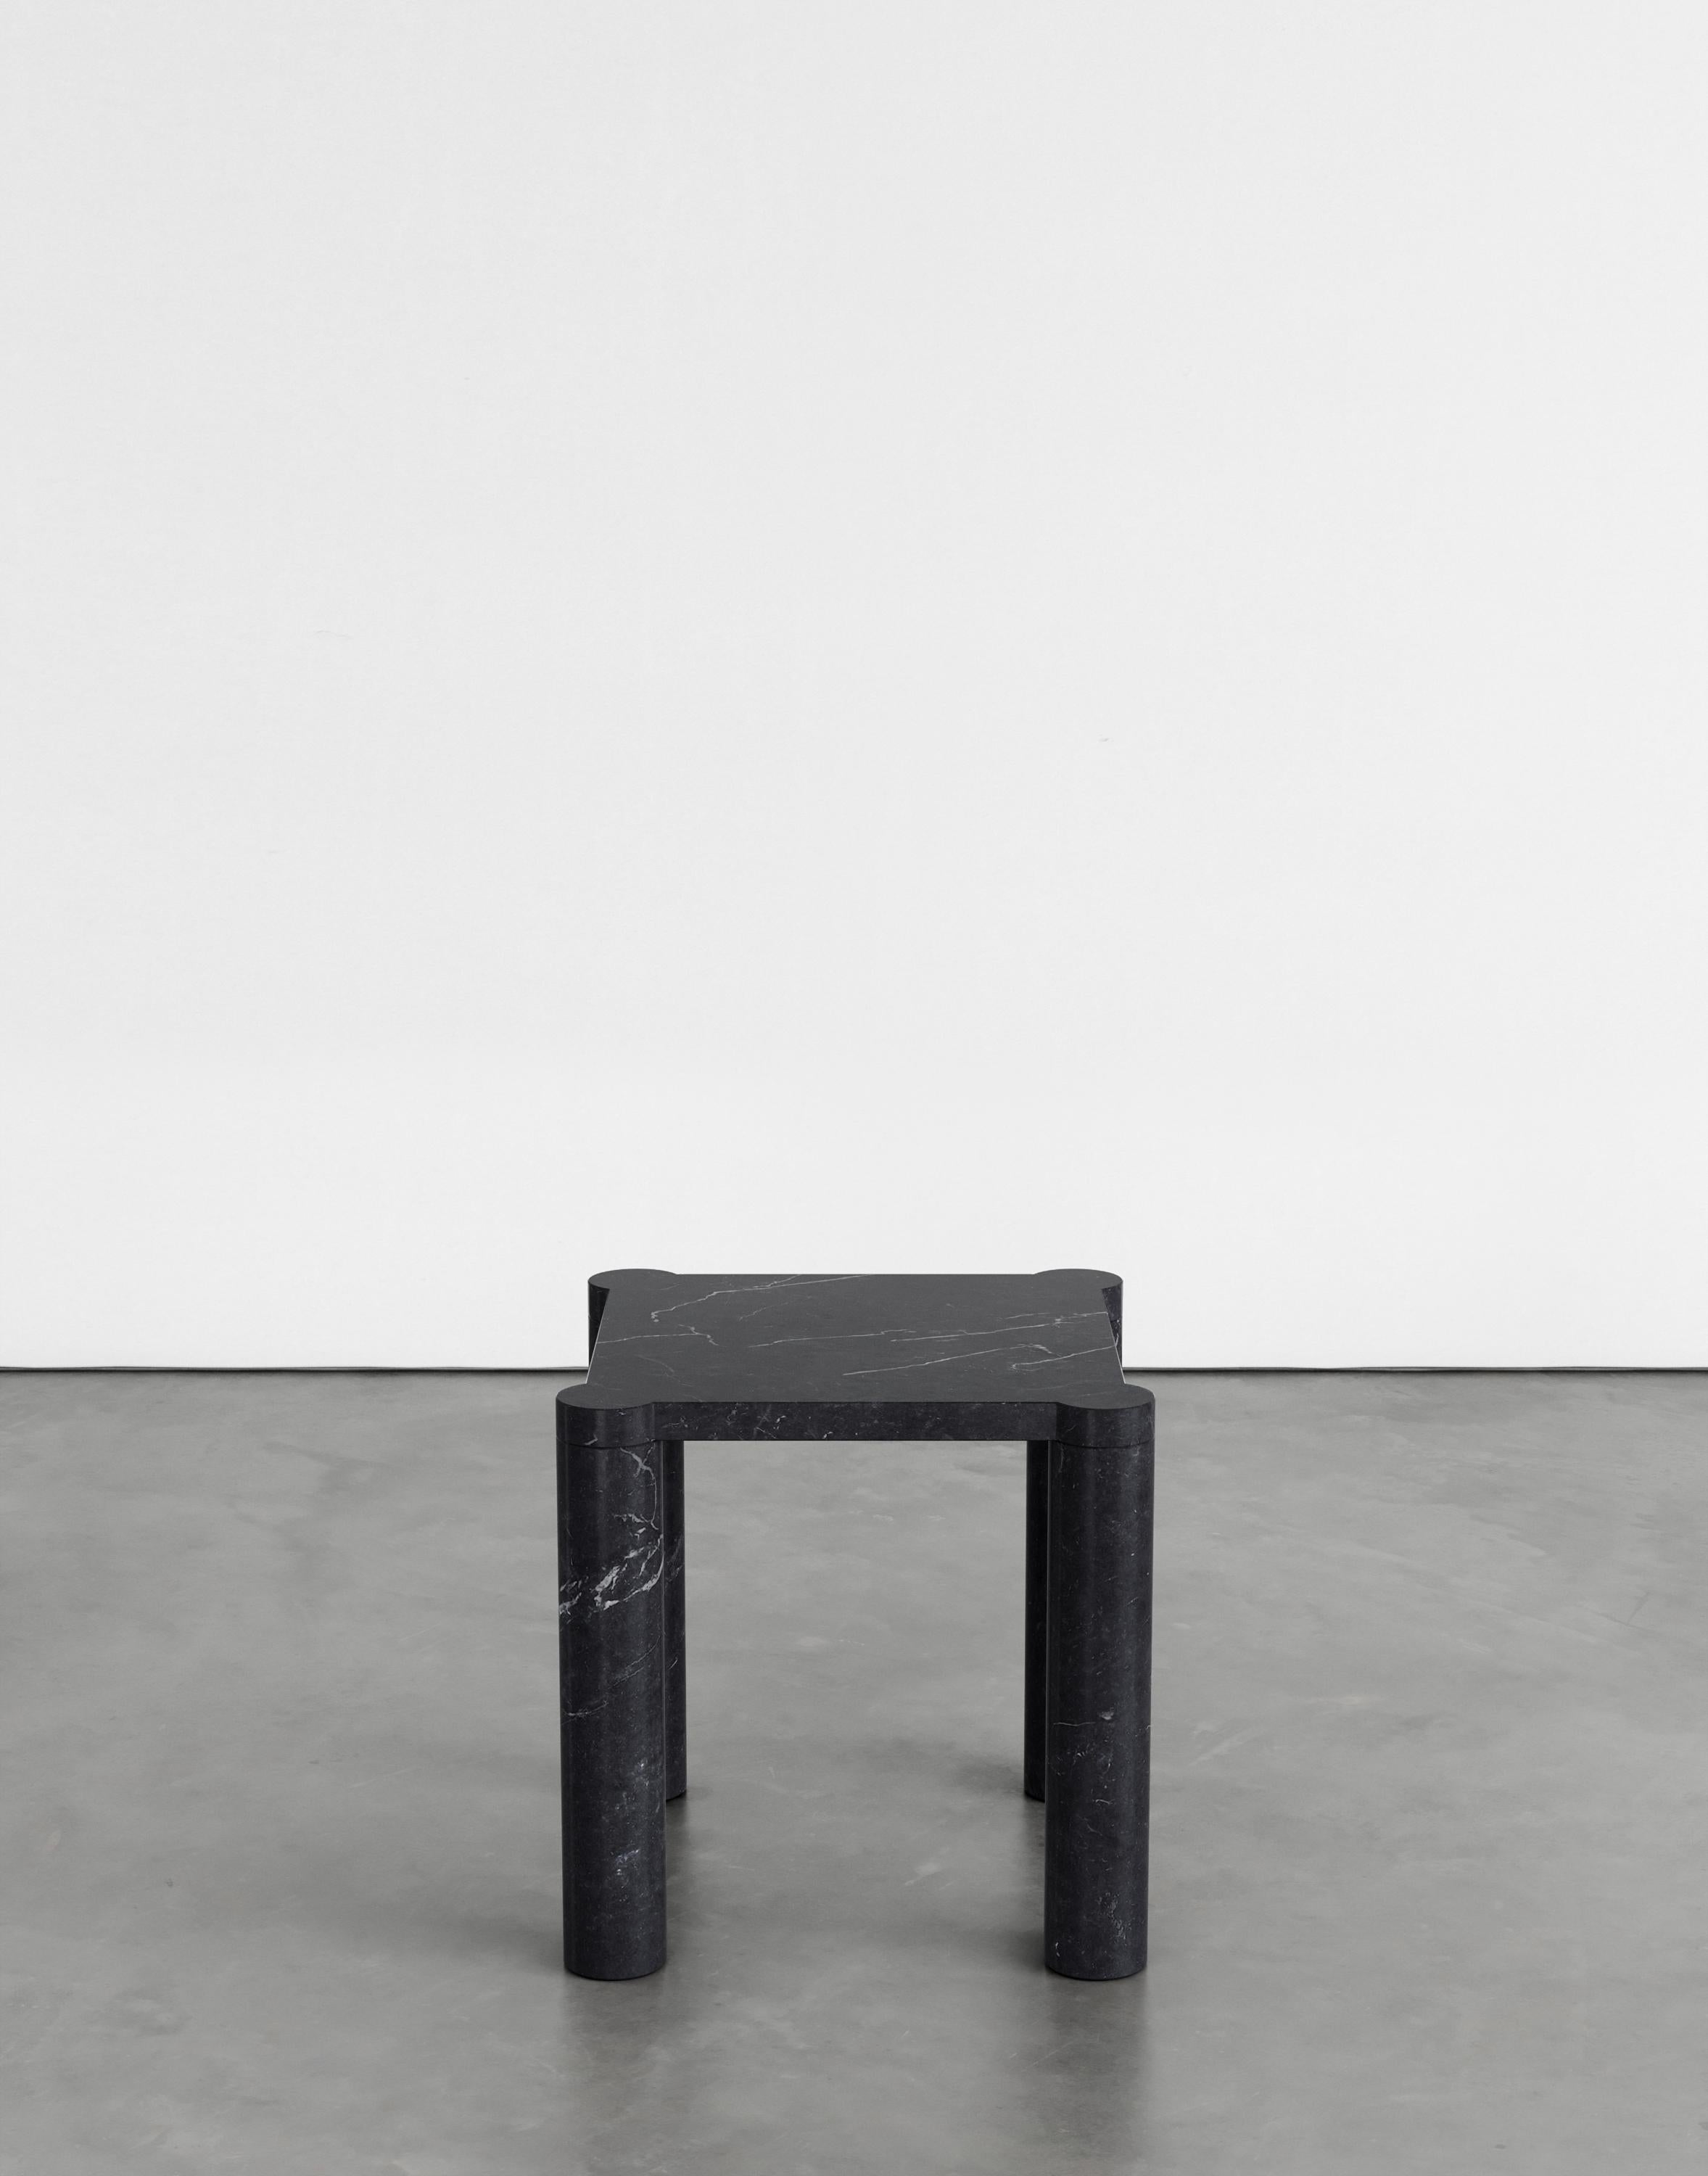 Alessio 45 side table by Agglomerati
Dimensions: D 45 x W 45 x H 45 cm.
Materials: Nero Marquina marble.
Available in other stones. 

Alessio is a square coffee table enclosed by four cylindrical legs which sit seamlessly flush under the